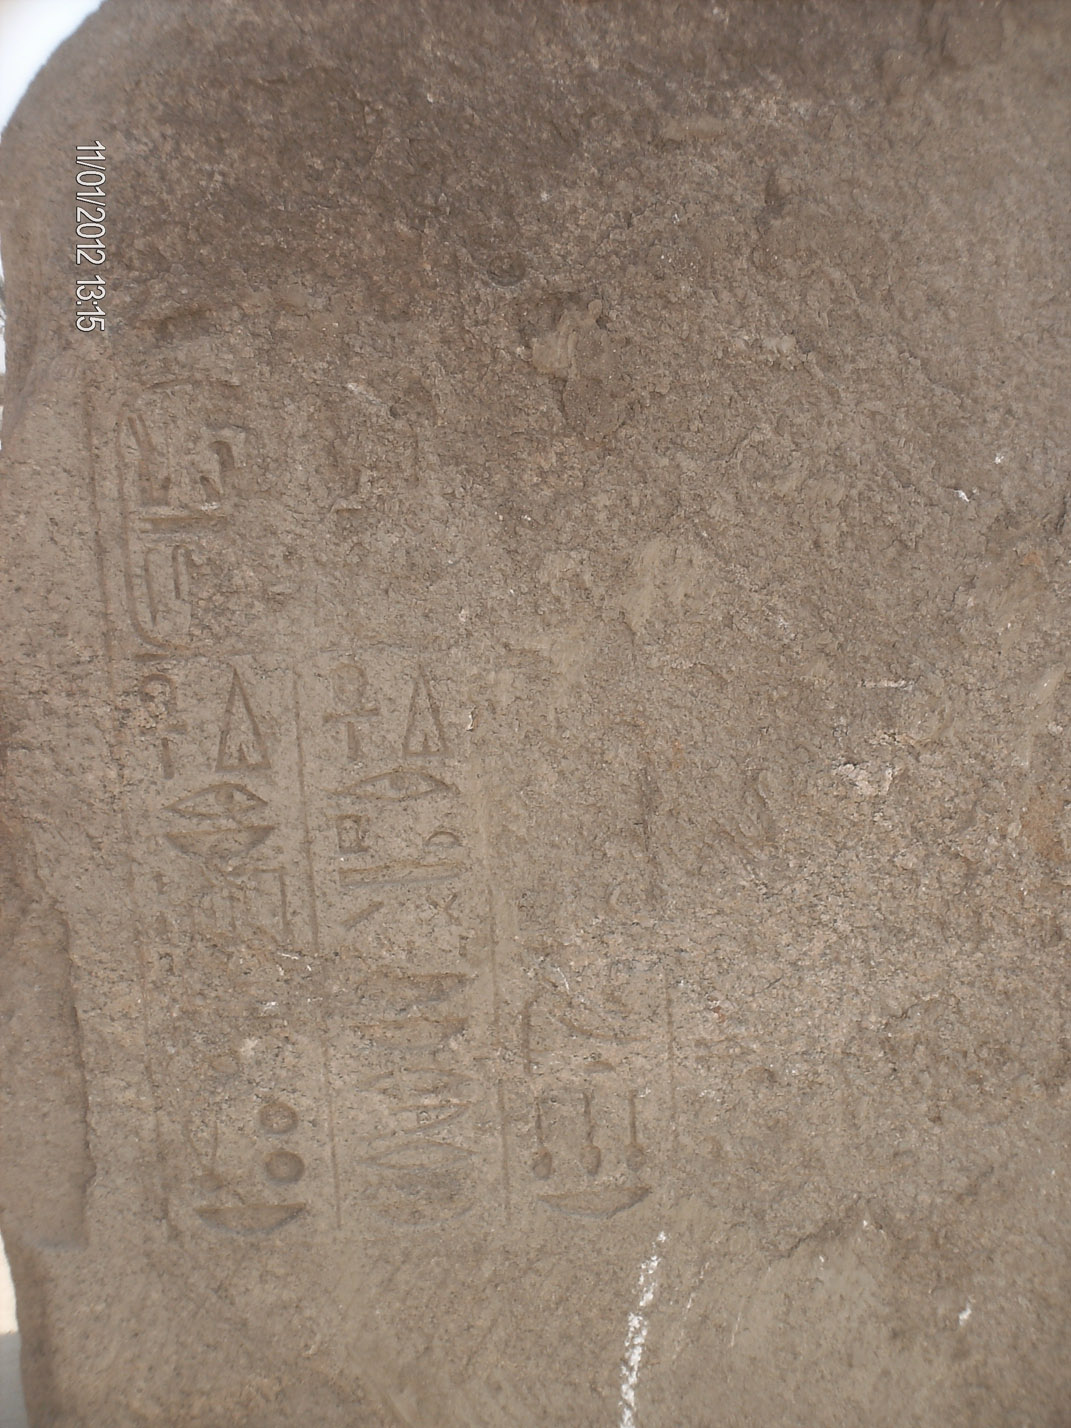 Ancient Egyptian artifacts uncovered in Sharqiya, North Sina Ramses+II+Cartouch+in+Sinai+By+Luxor+Times